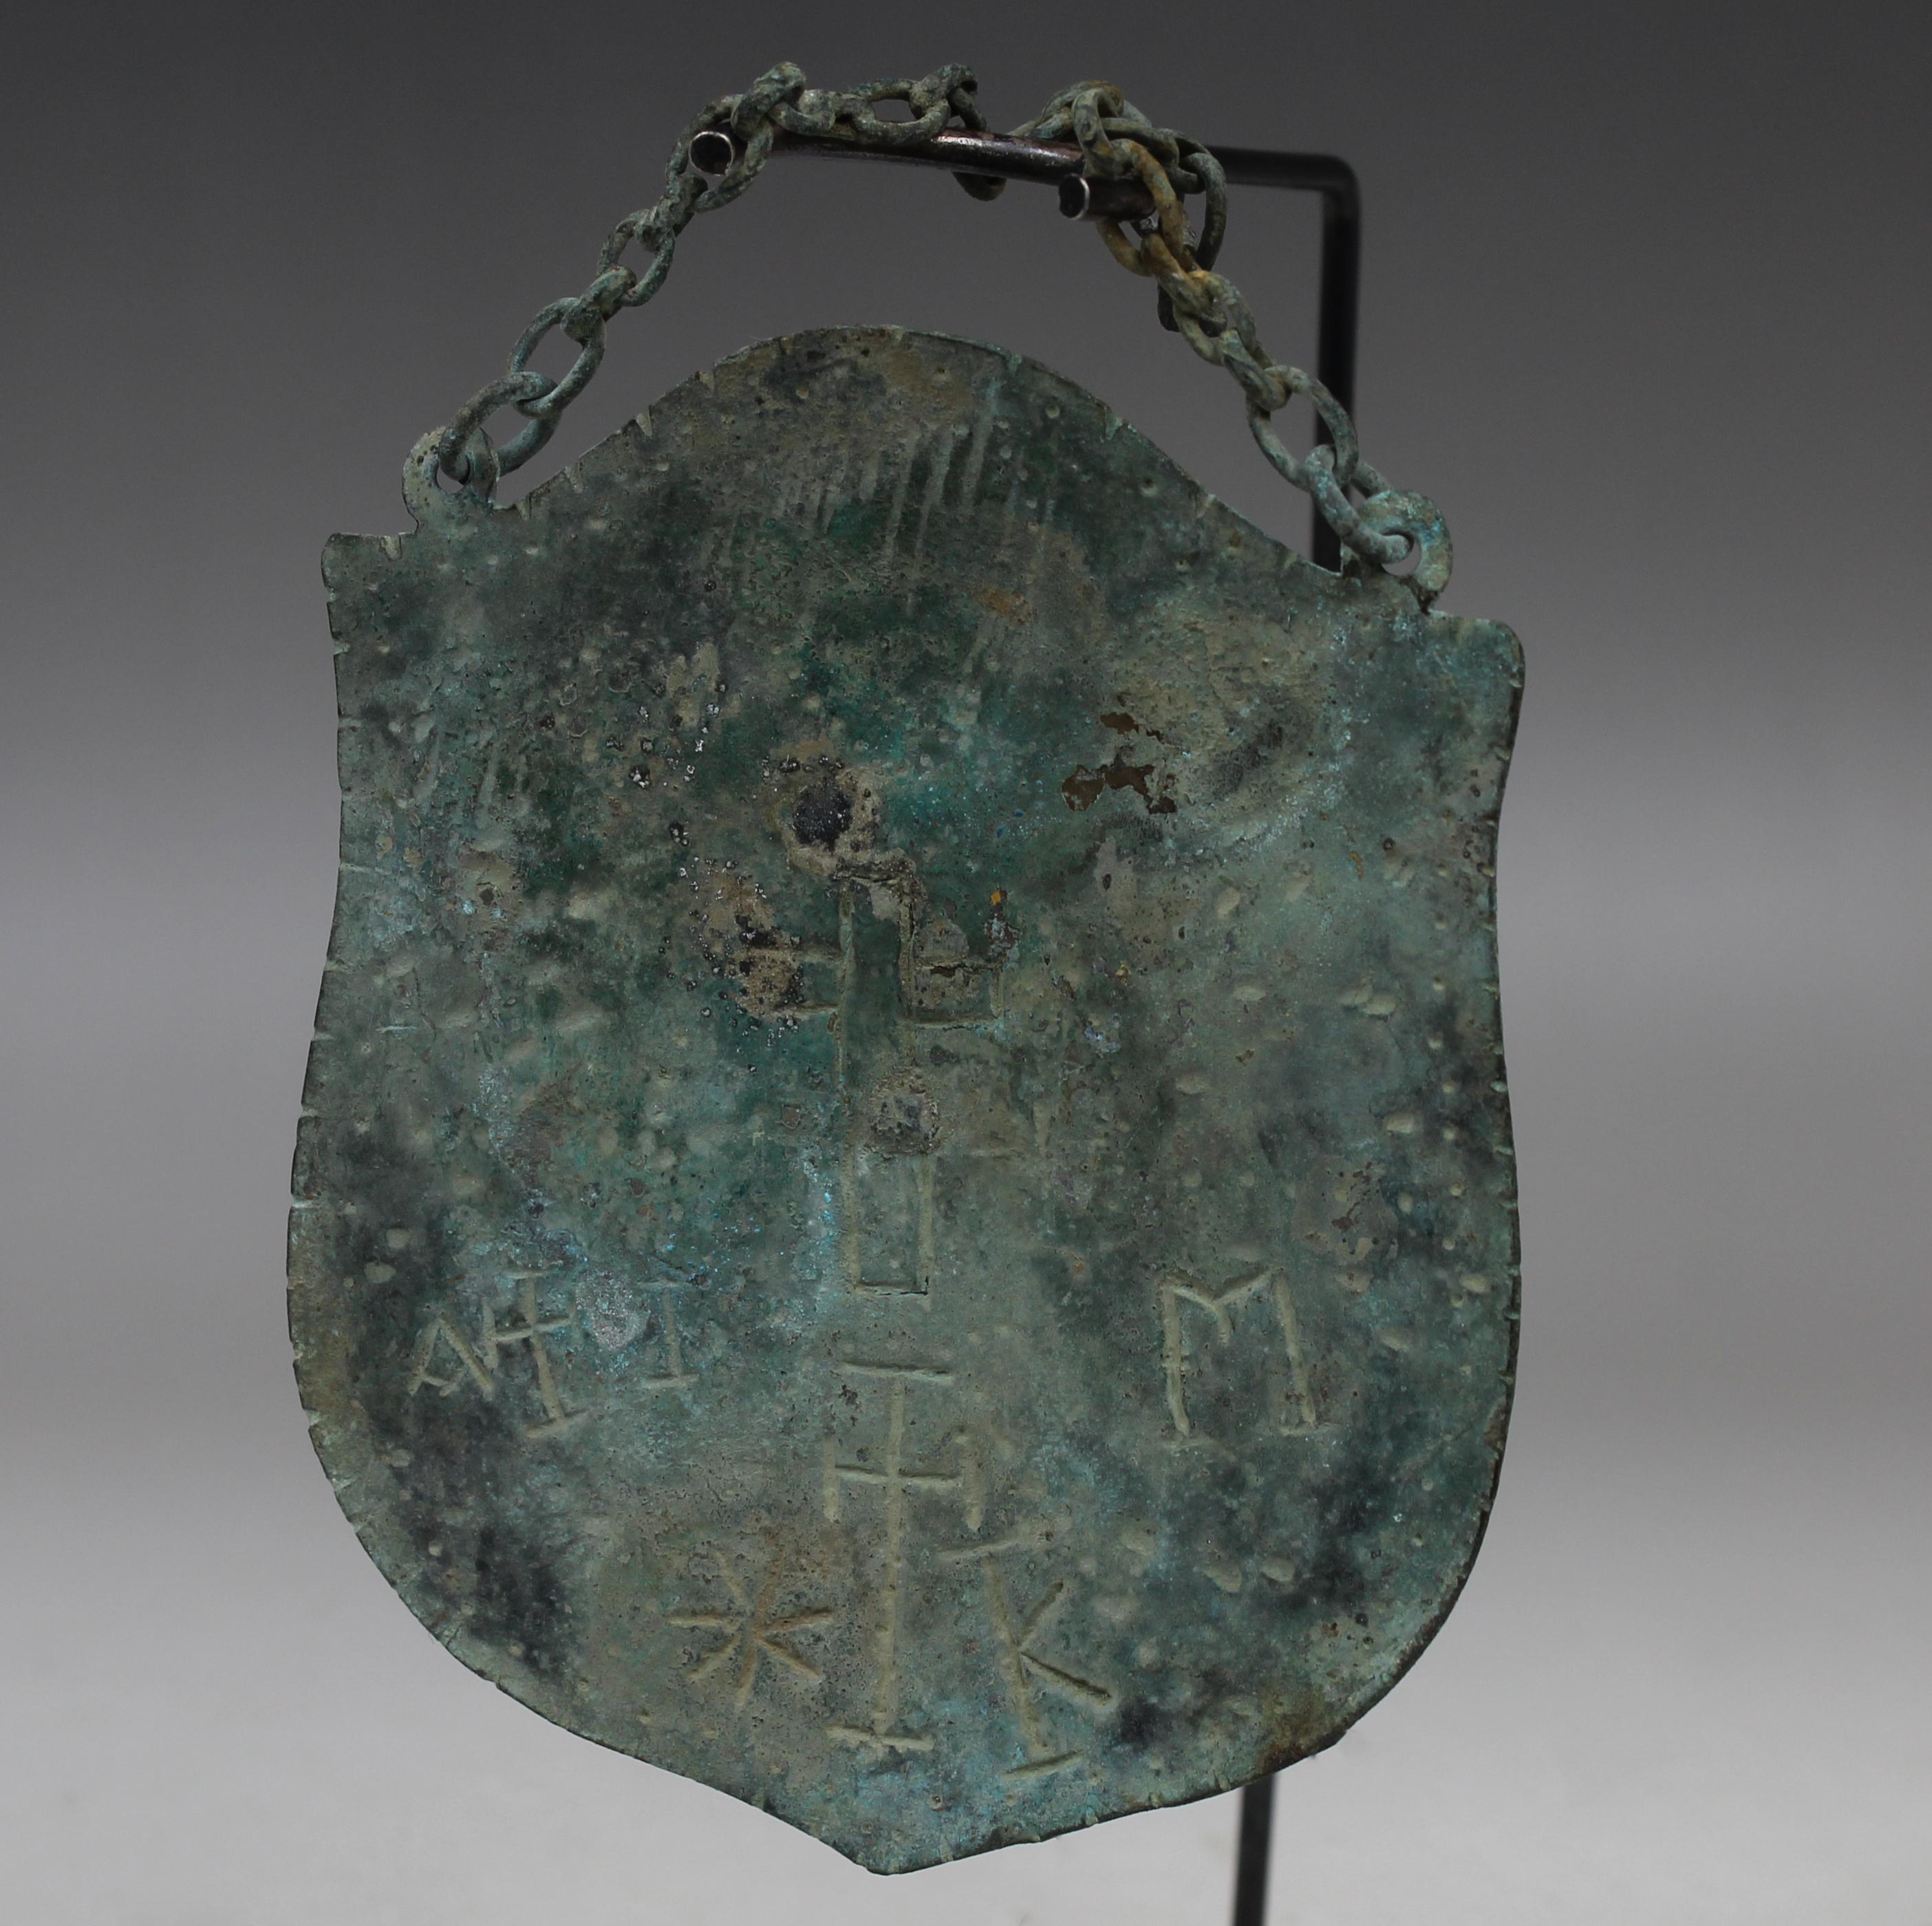 ITEM: Pilgrims badge / Plaque with incised cross and inscription with original suspension chain
MATERIAL: Bronze
CULTURE: Byzantine
PERIOD: 5th – 8th Century A.D
DIMENSIONS: 95 mm x 80 mm (without chain), 140 mm x 80 mm (with chain)
CONDITION: Good